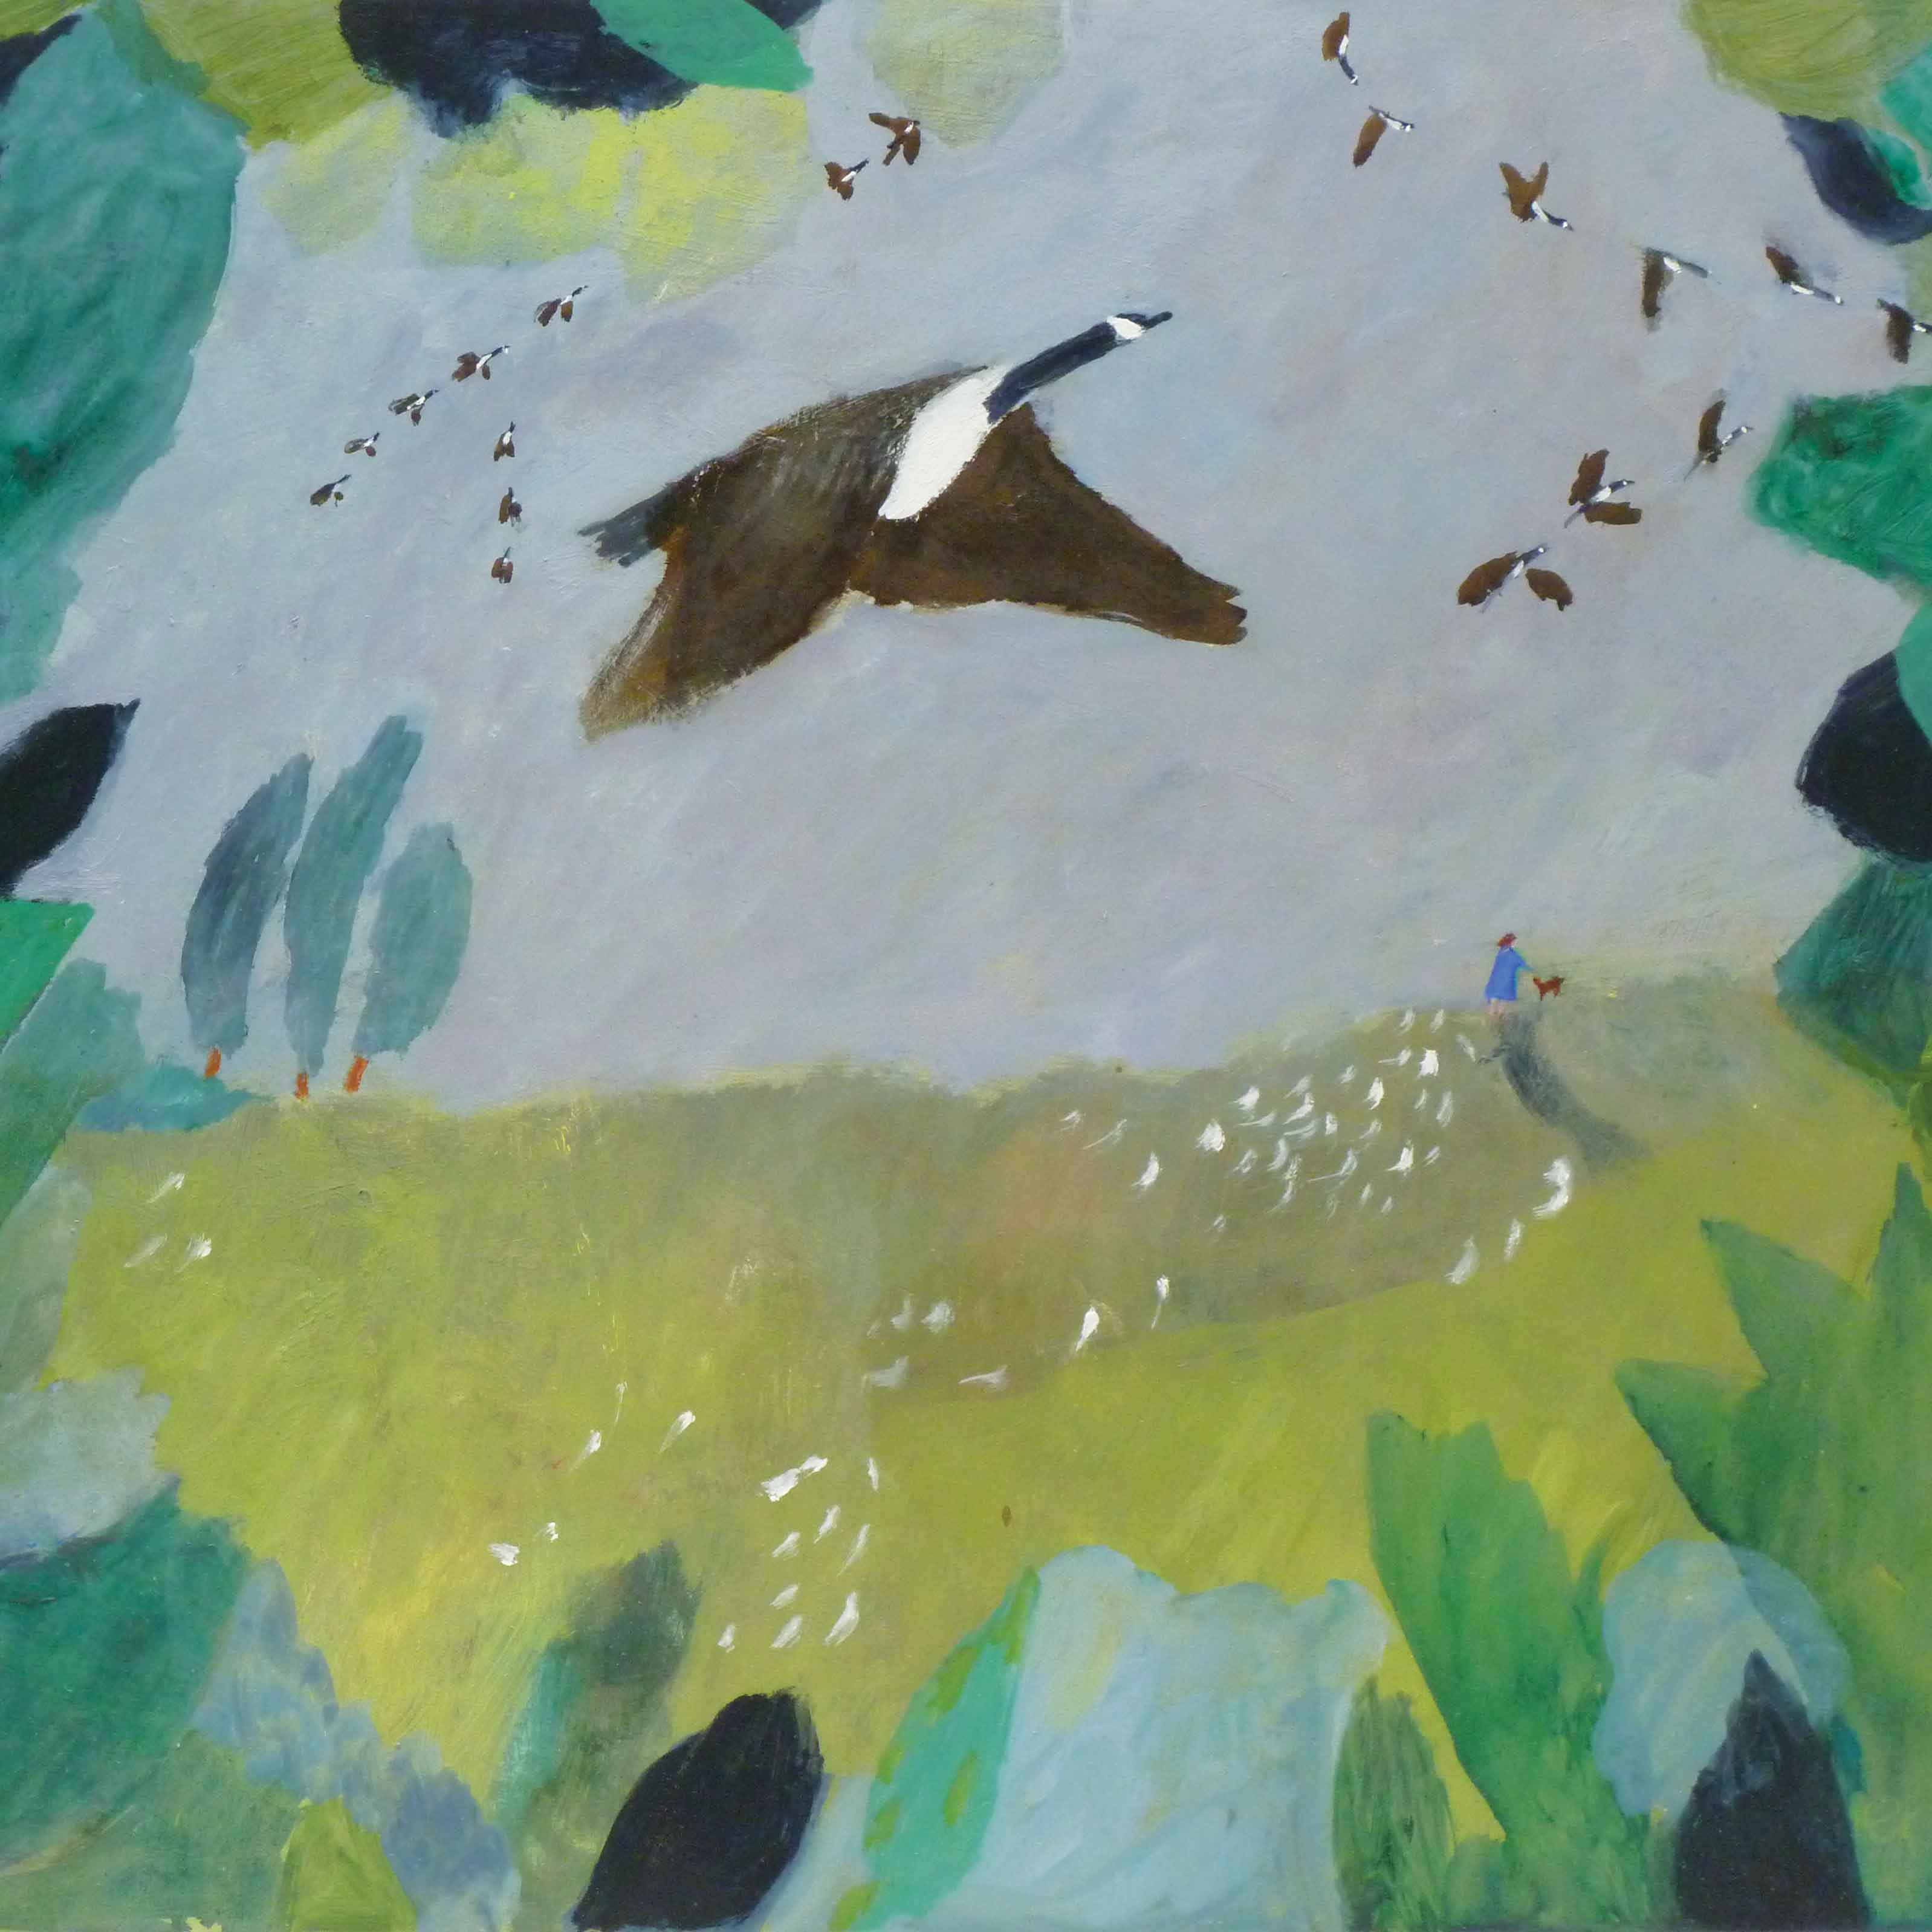 Art Greeting Card by Susan Bower, Oilpainting, Geese taking off